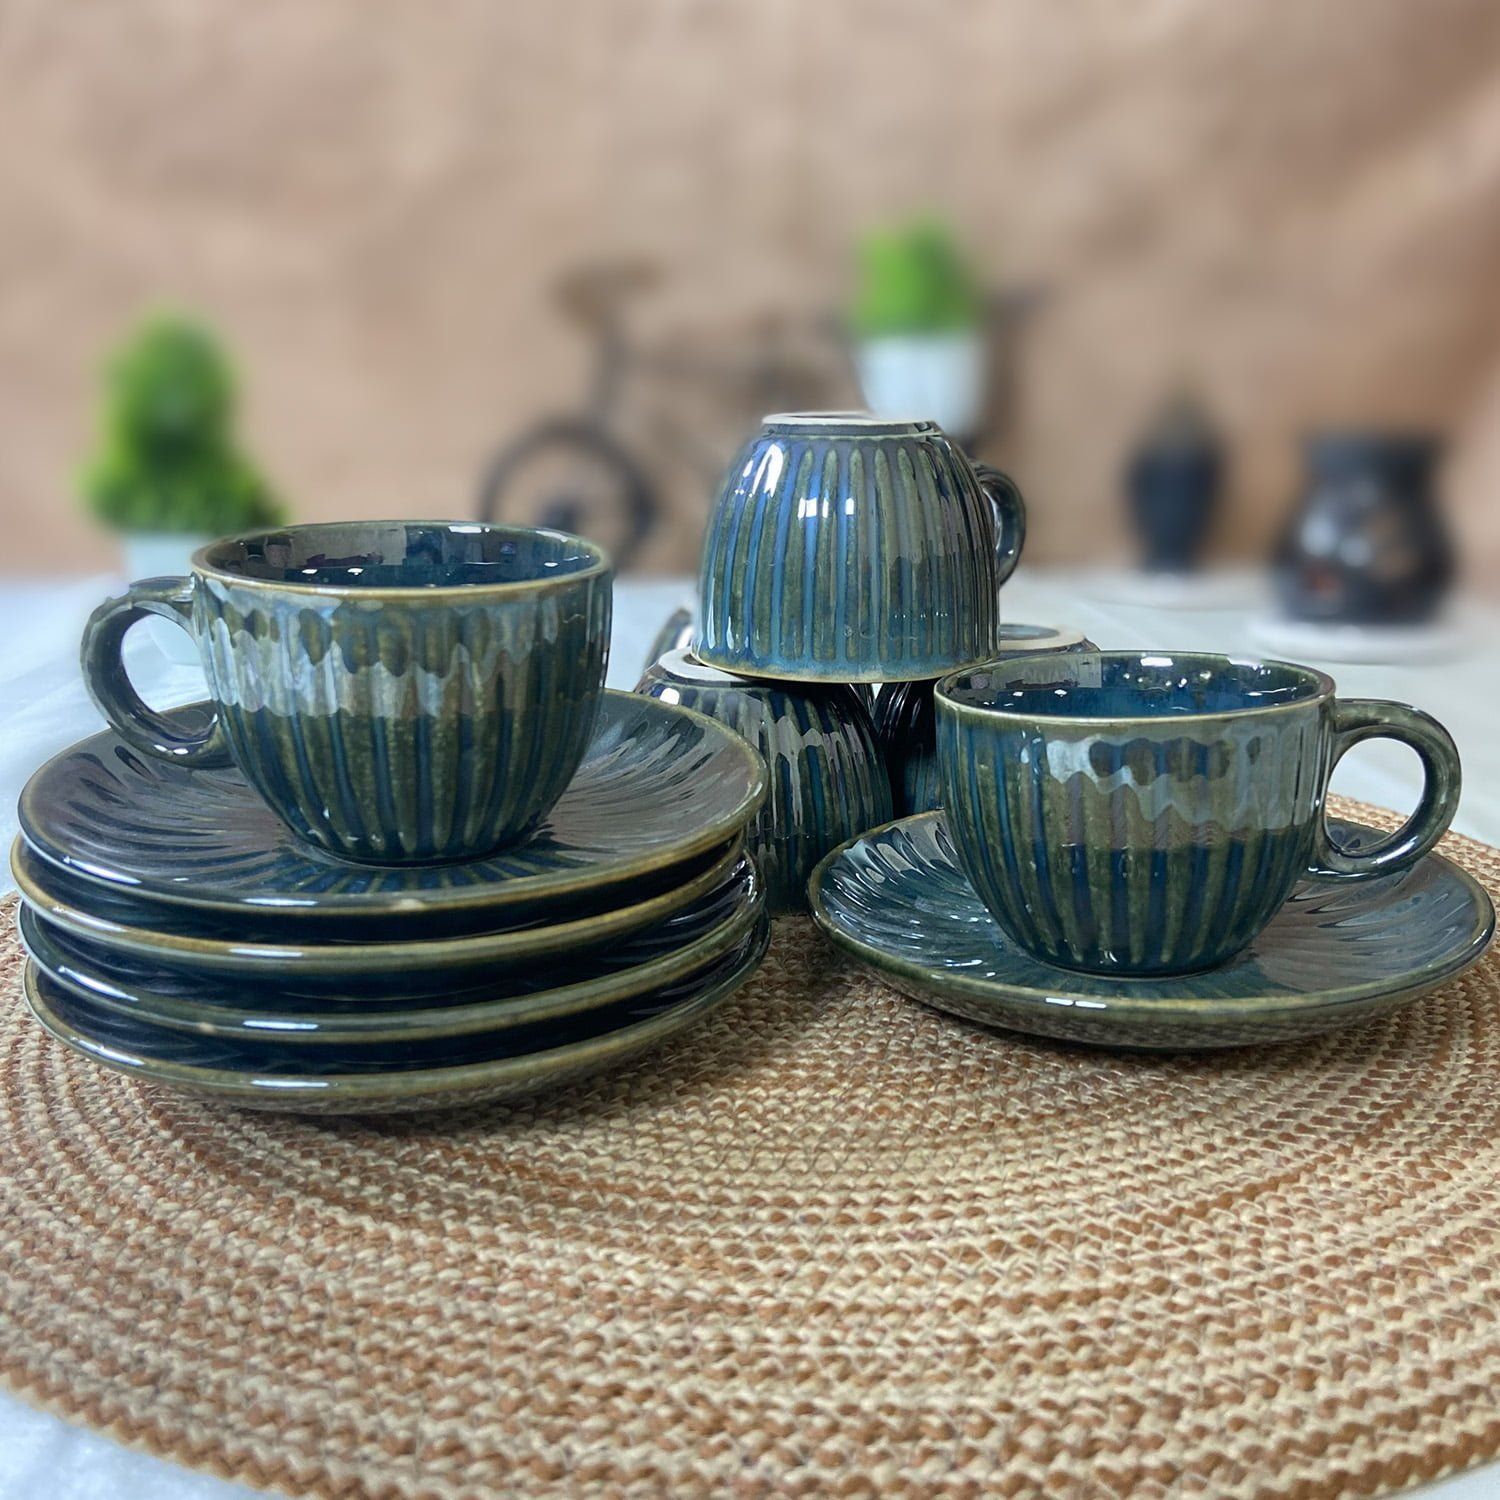 Ceramic Dining Chic Emerald Green Tea cups with Saucers Set of 6